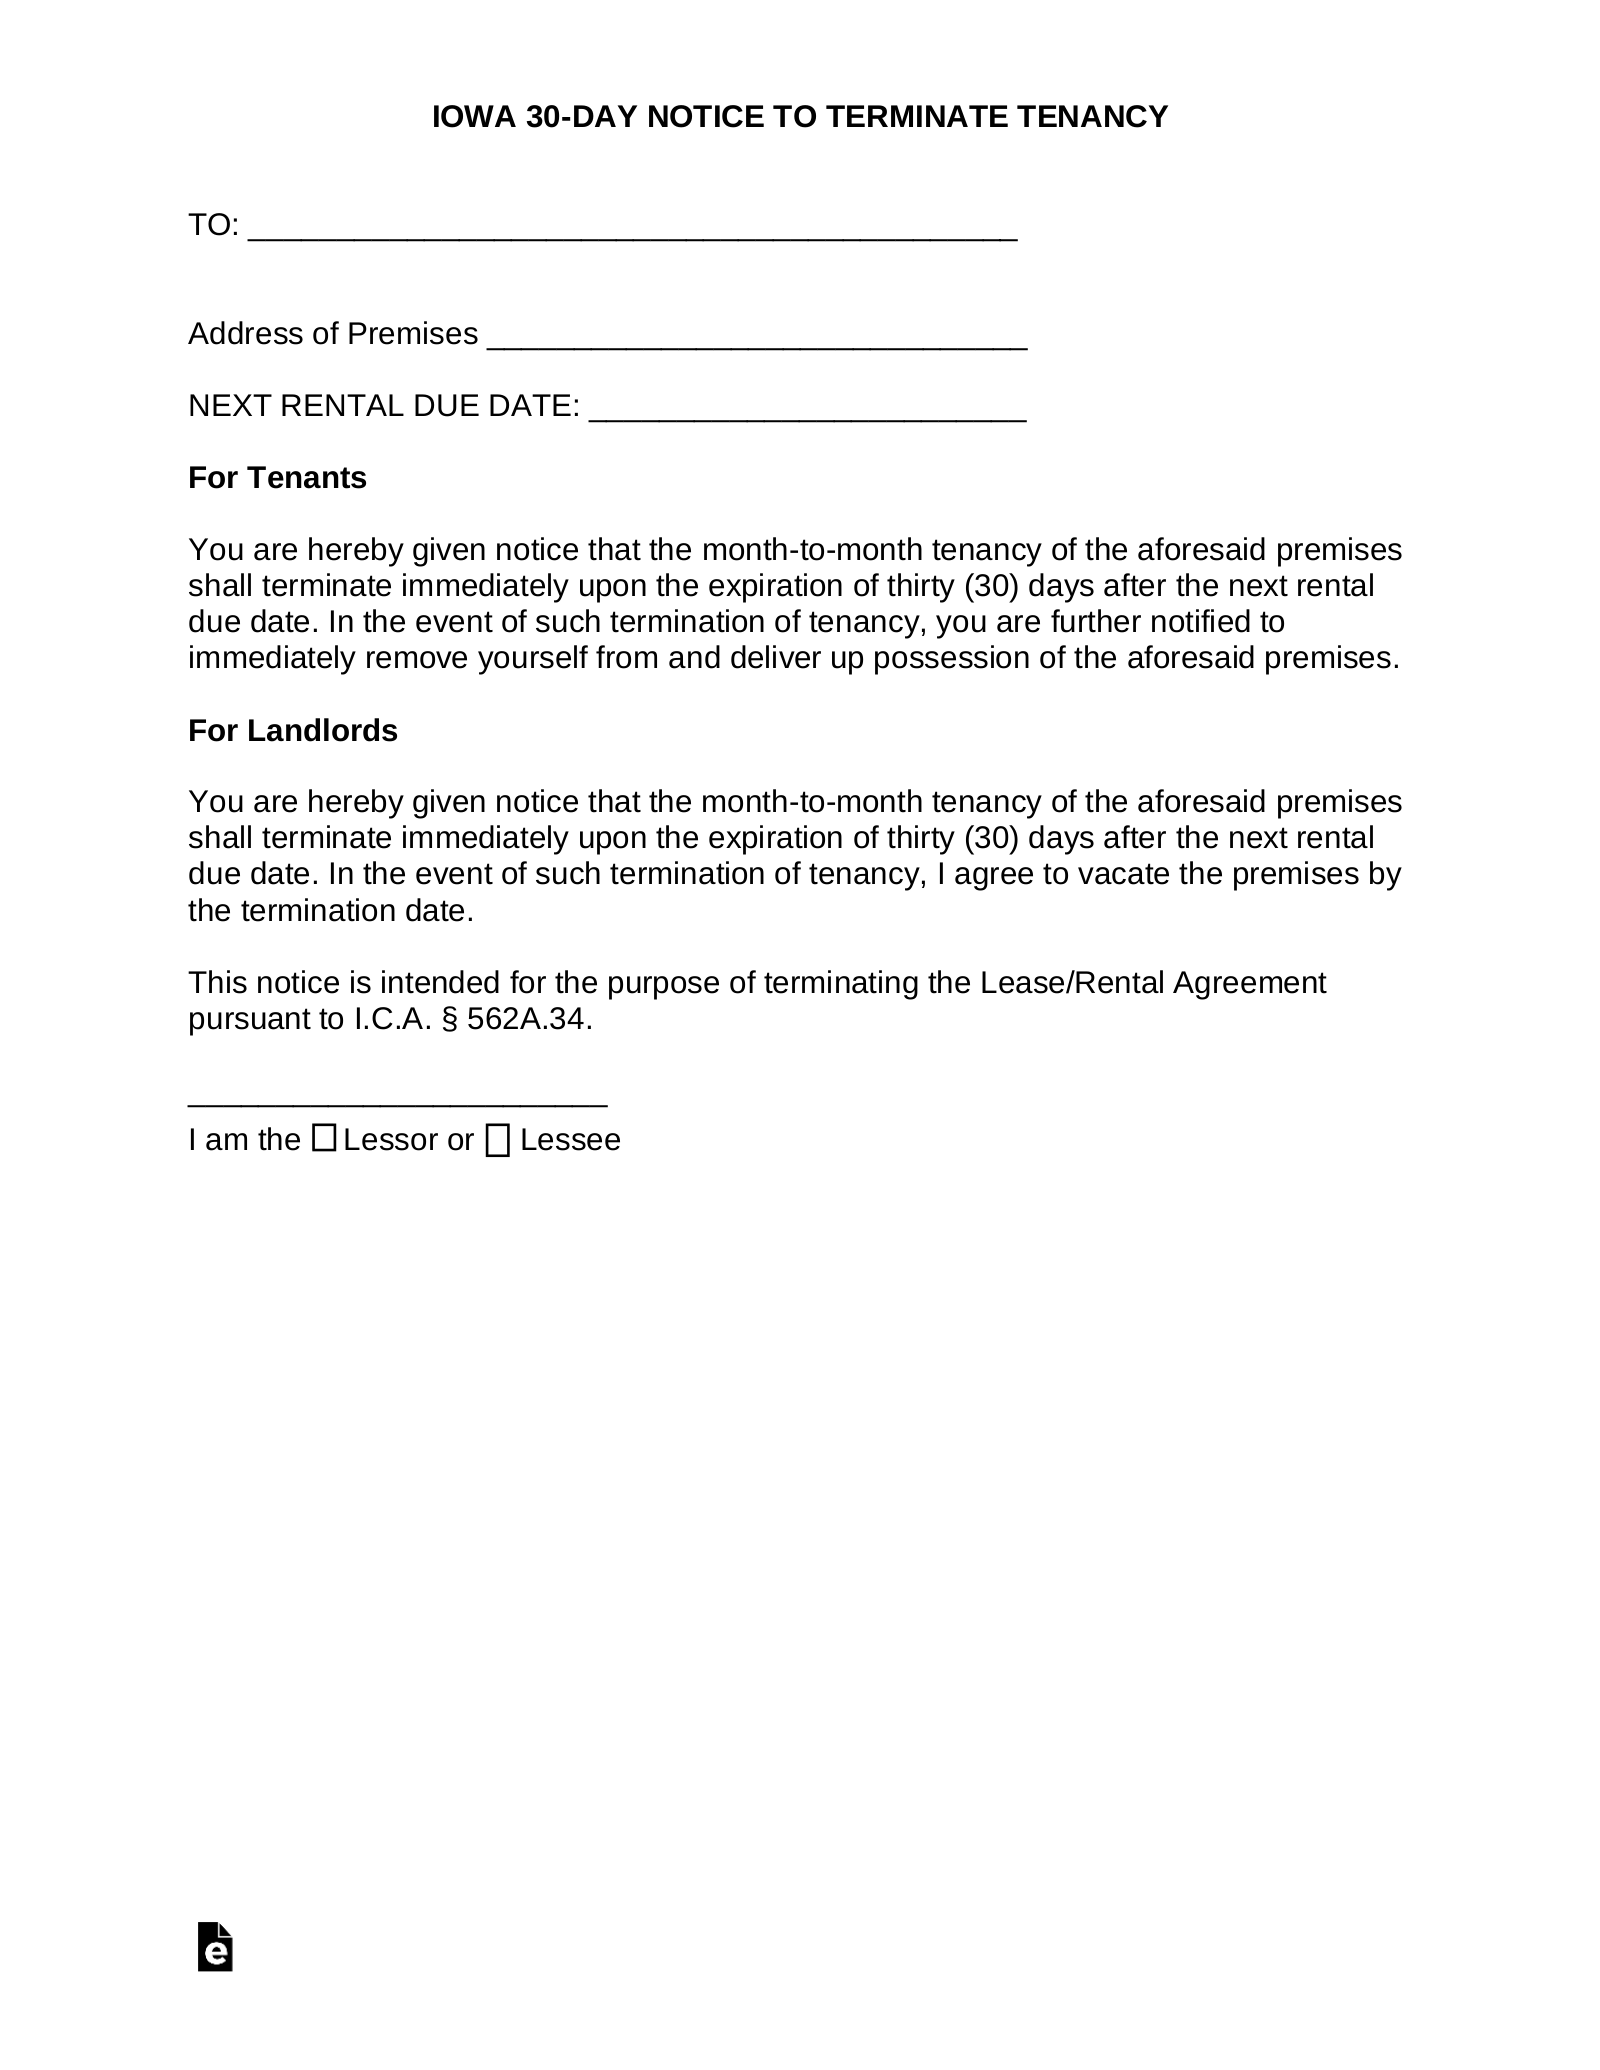 Sample Letter To Notify Tenant Of Sale Of Property from eforms.com